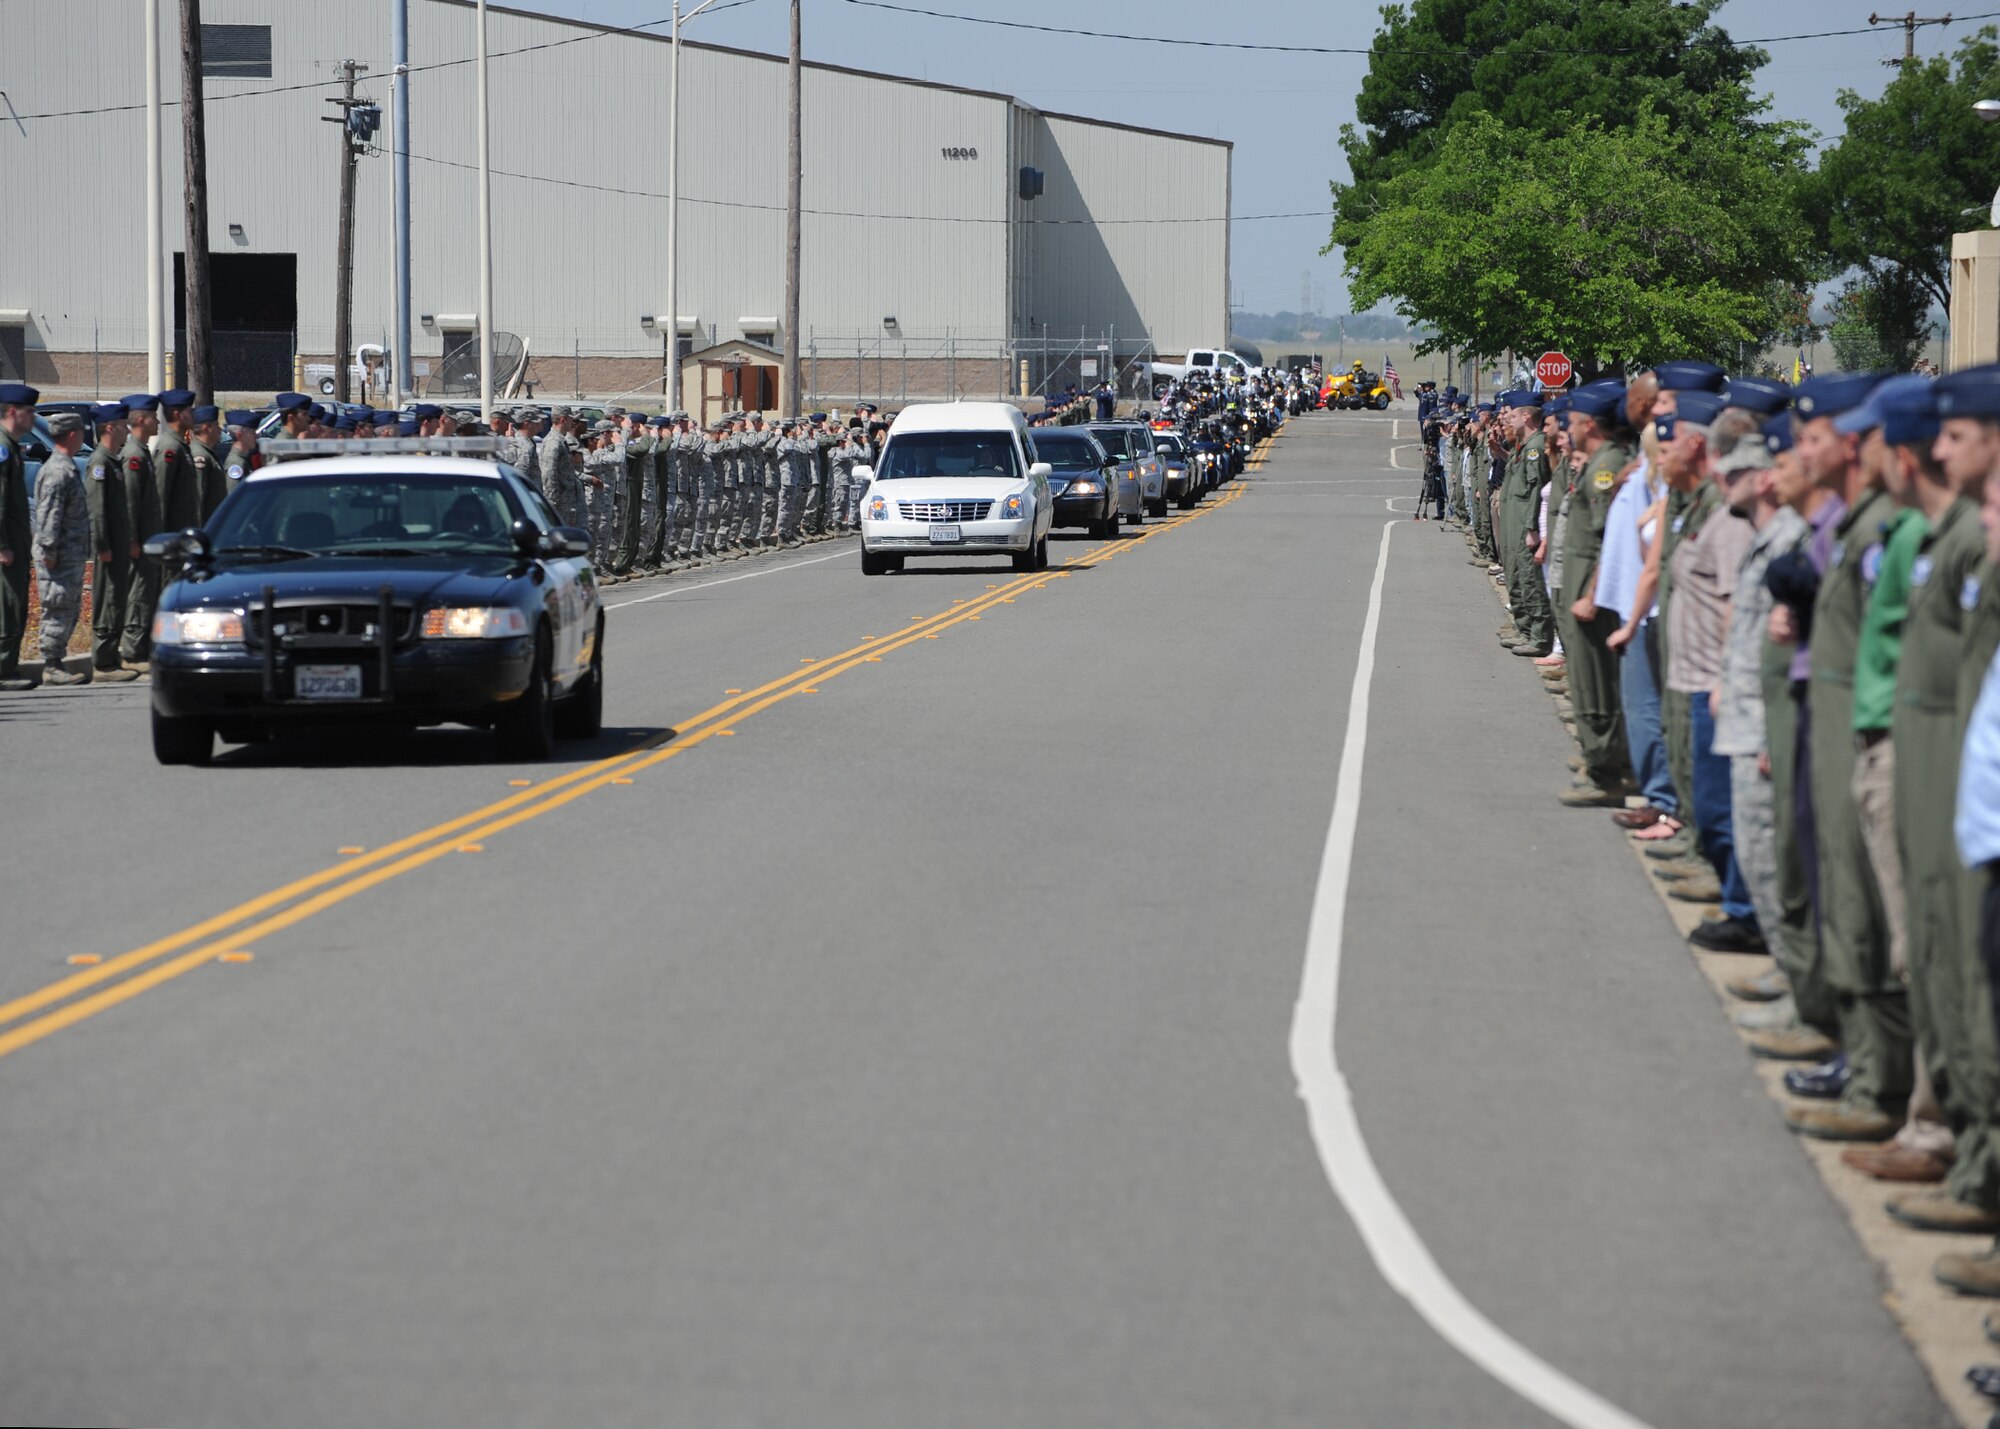 Airmen line the procession route during the dignified transfer of Staff Sgt. Richard Dickson at Beale Air Force Base Calif., May 10, 2013. Airmen honored Dickson with a final salute. (U.S. Air Force photo by John Schwab/Released)